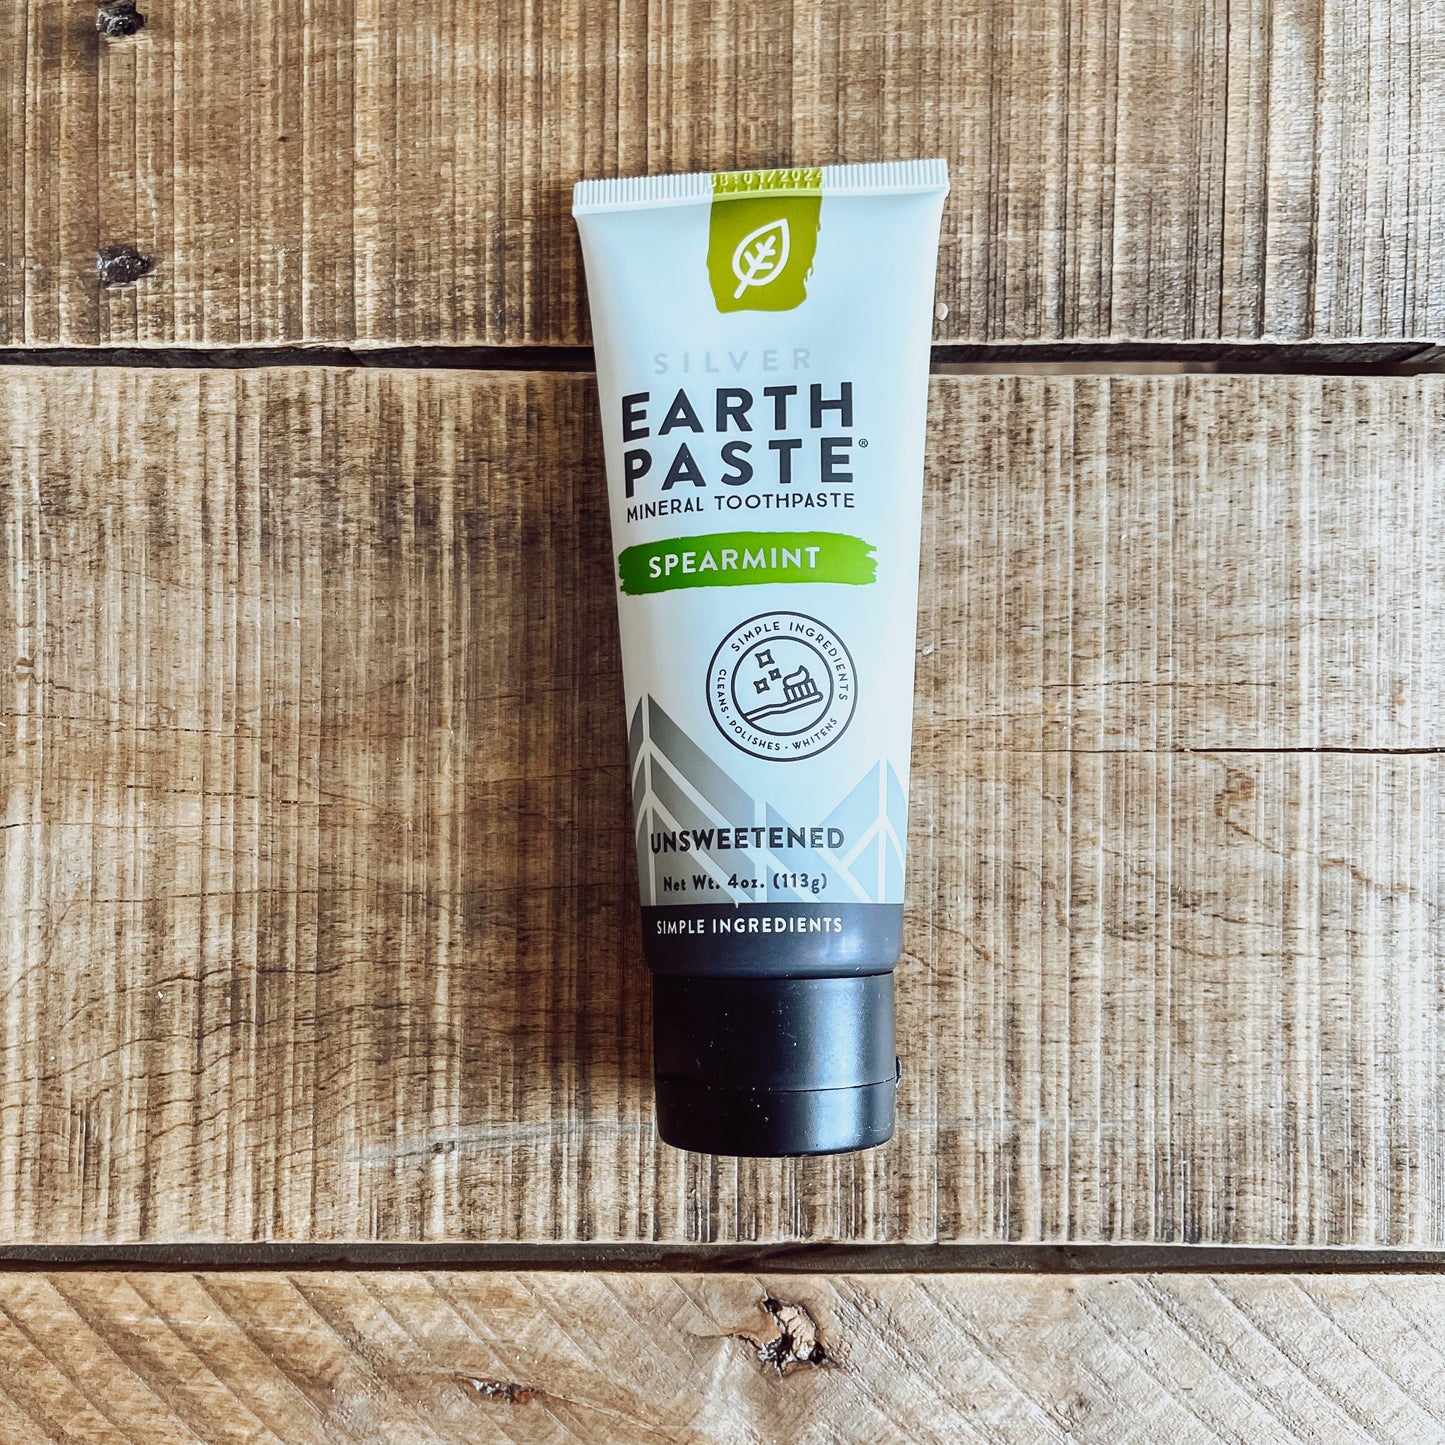 Silver Earth Paste Mineral Toothpaste - Spearmint unsweetened